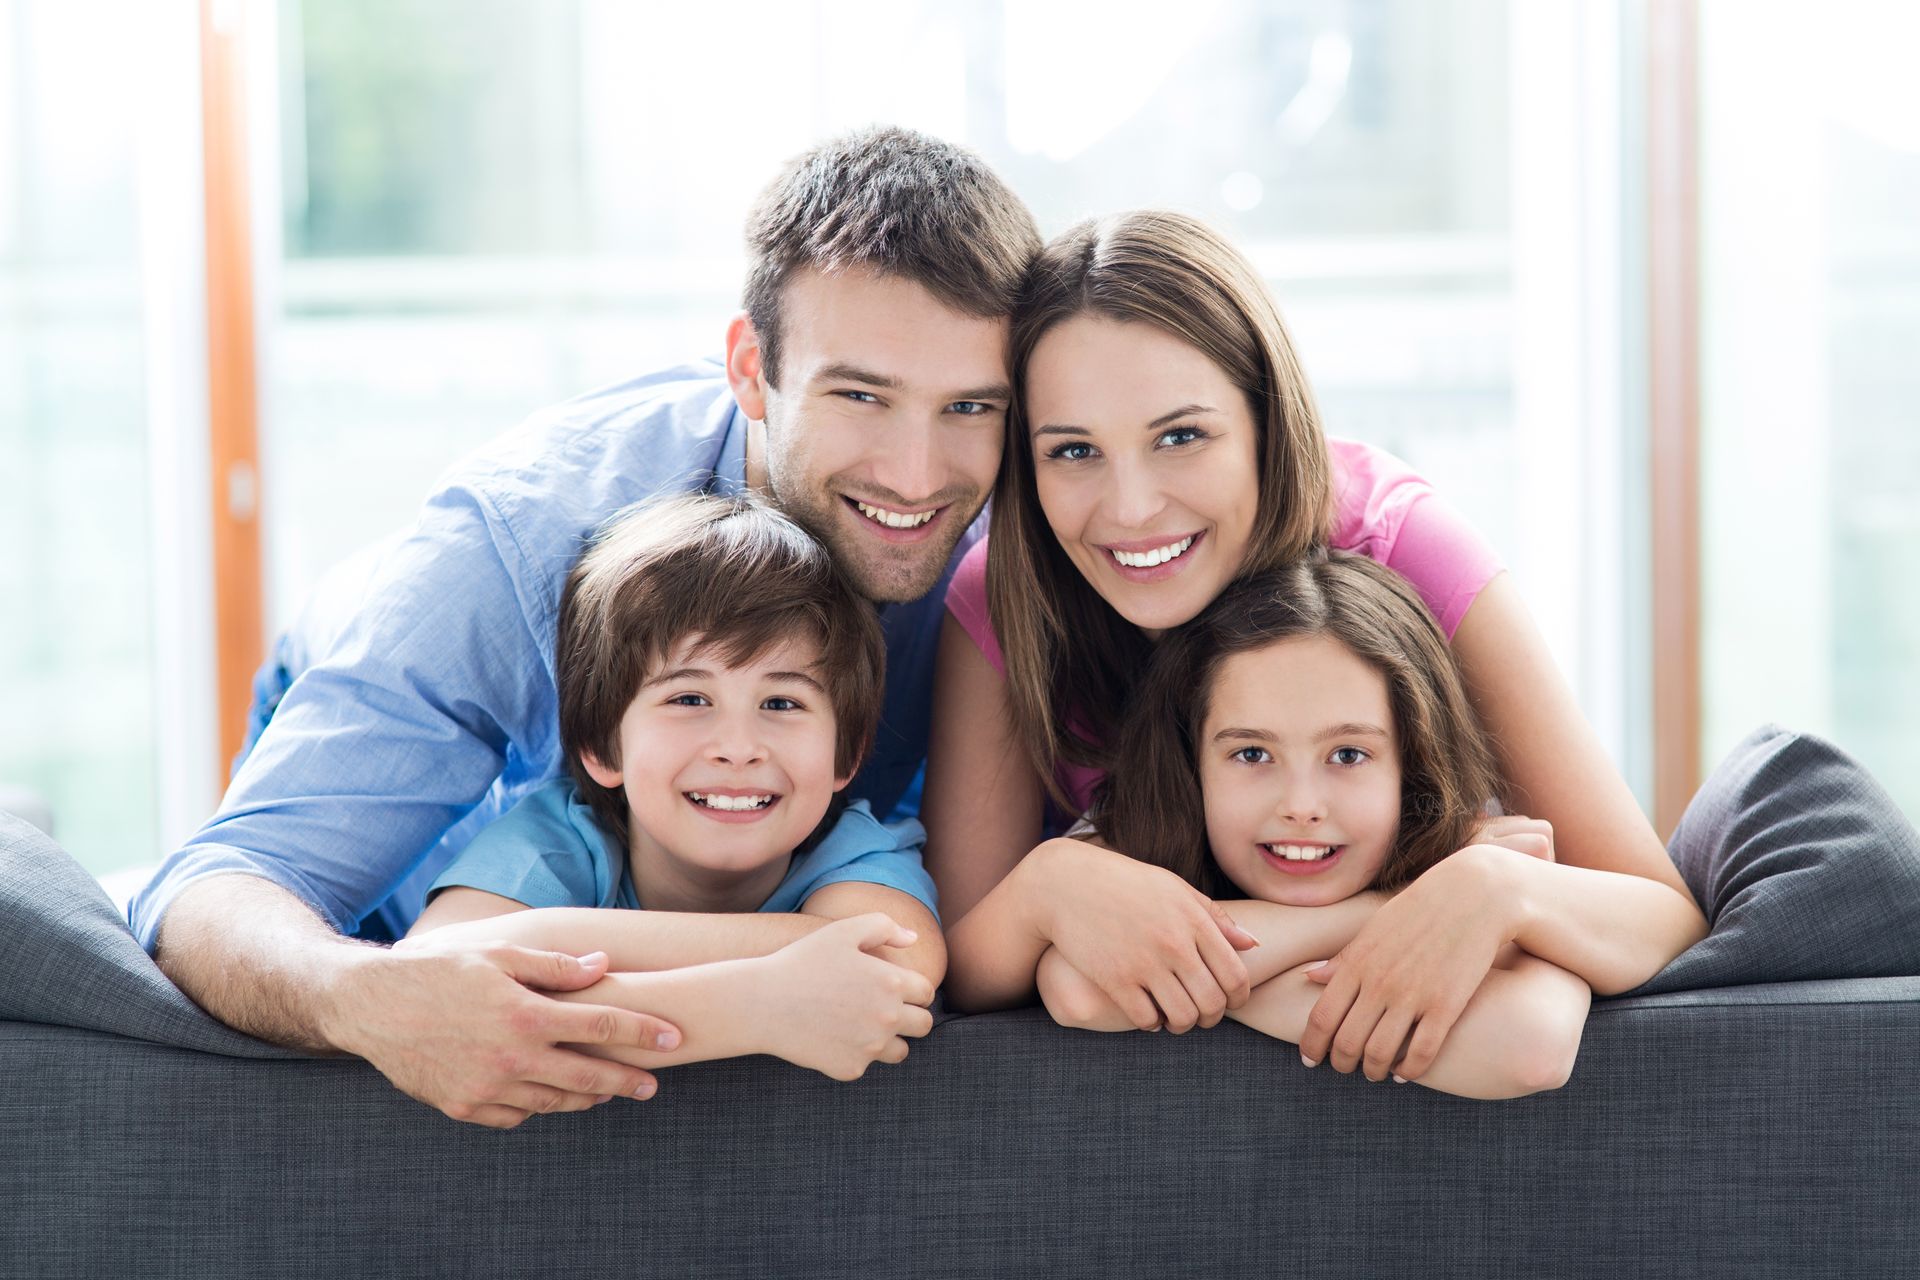 A family is laying on a couch and smiling for the camera.